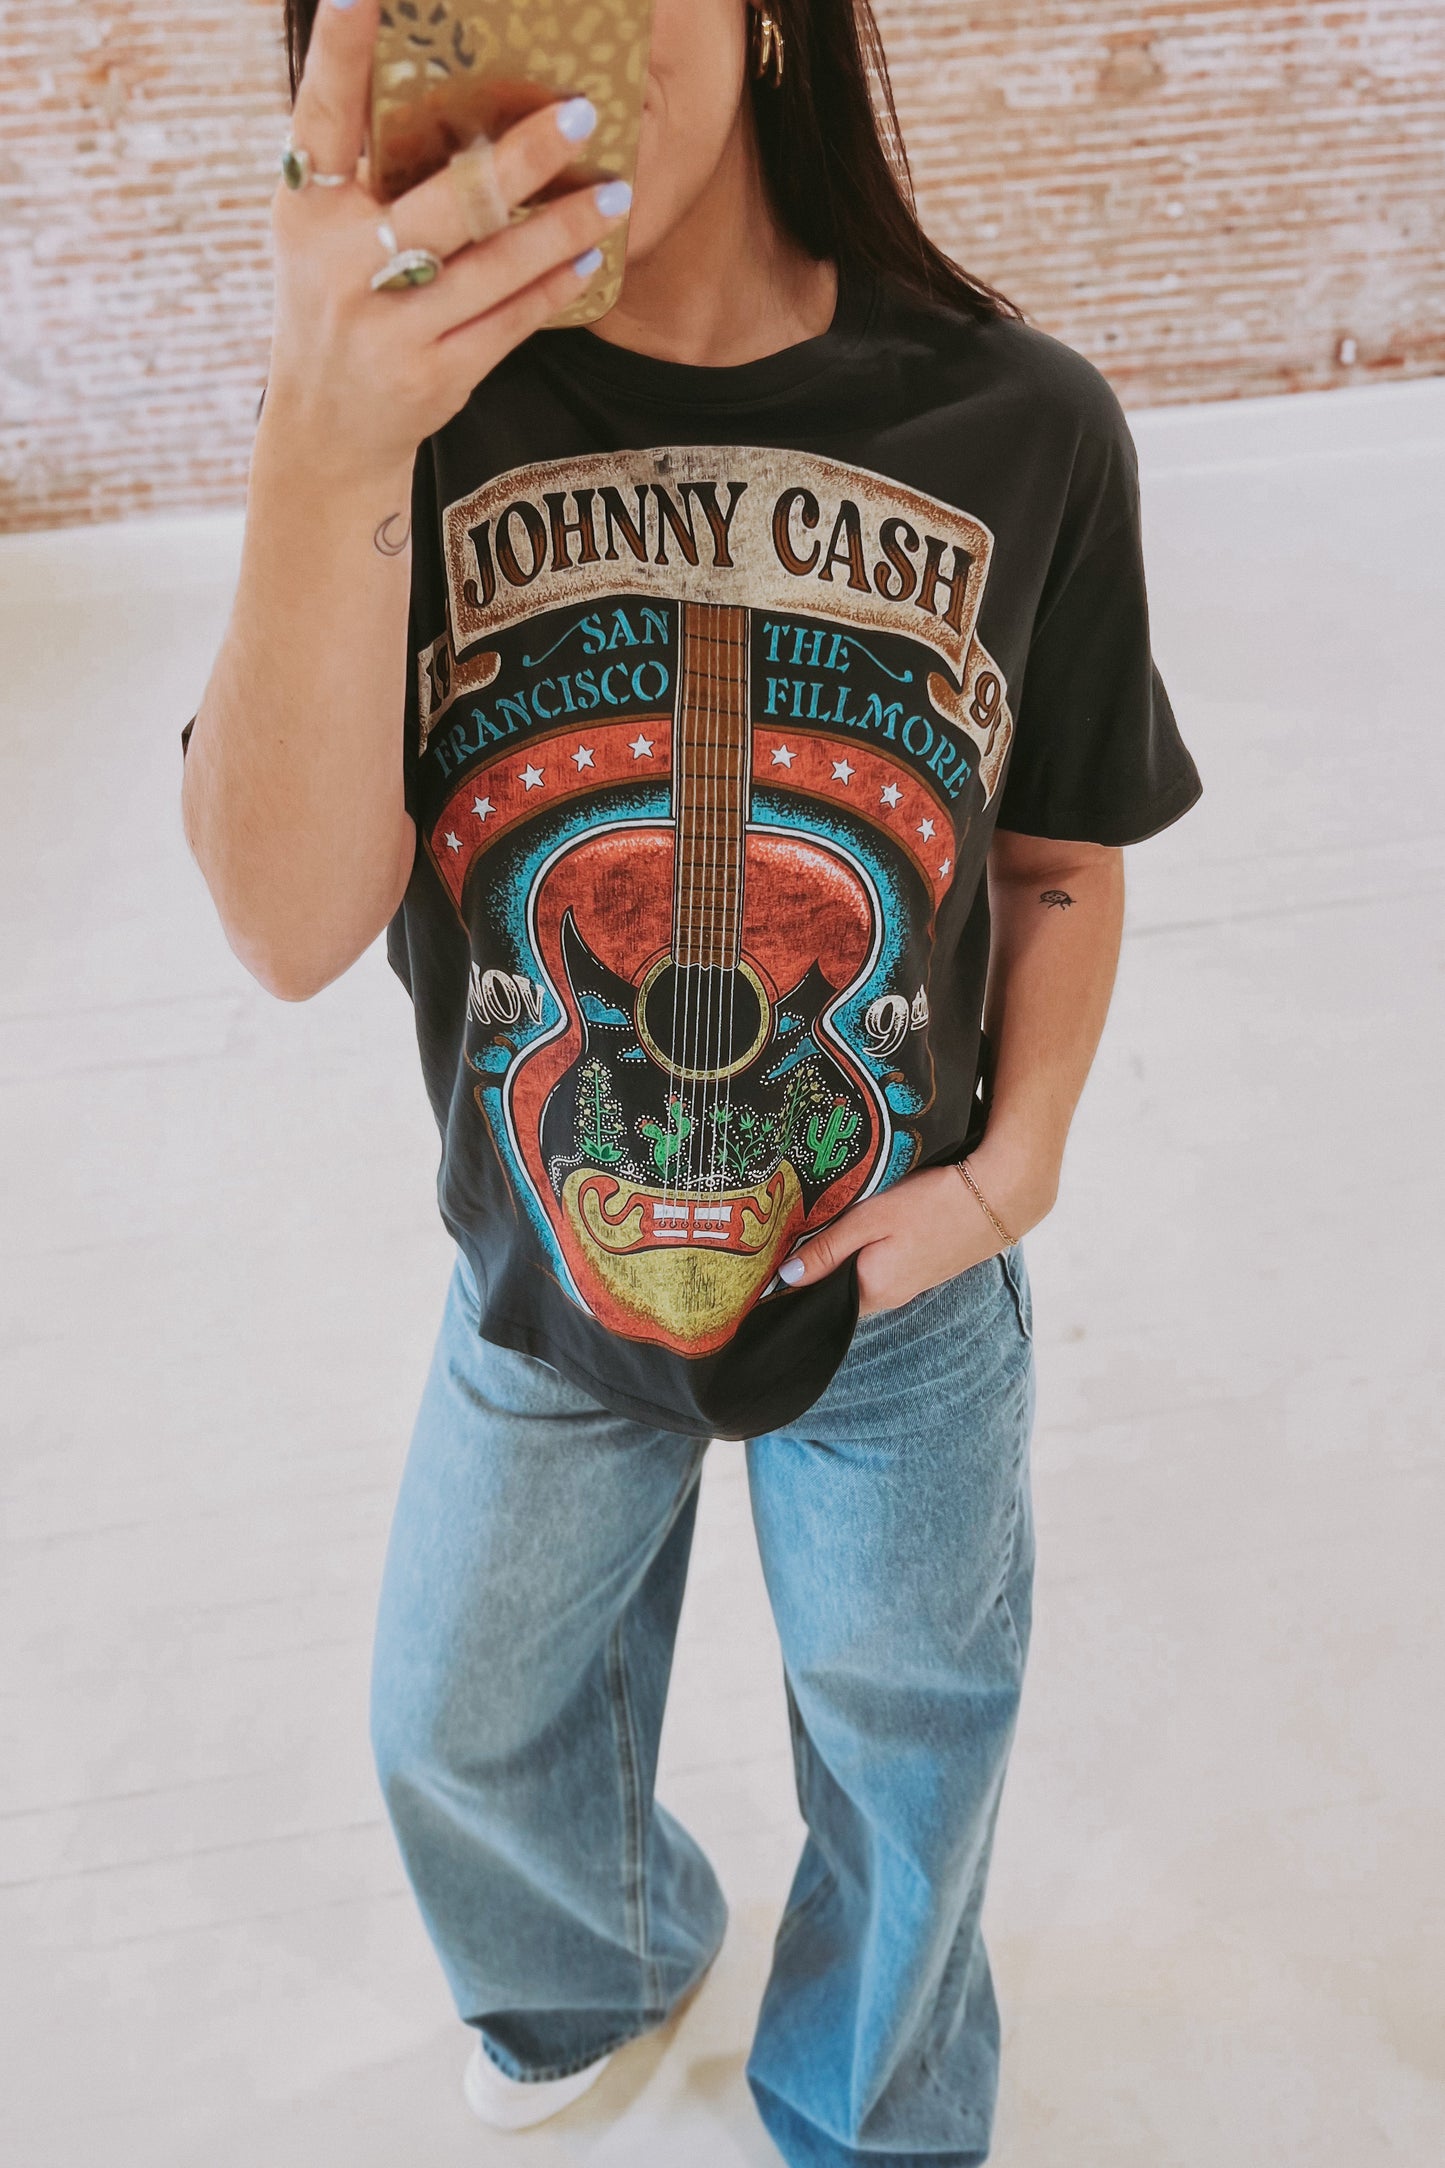 Johnny Cash "1996 Fillmore Show" Graphic Tee